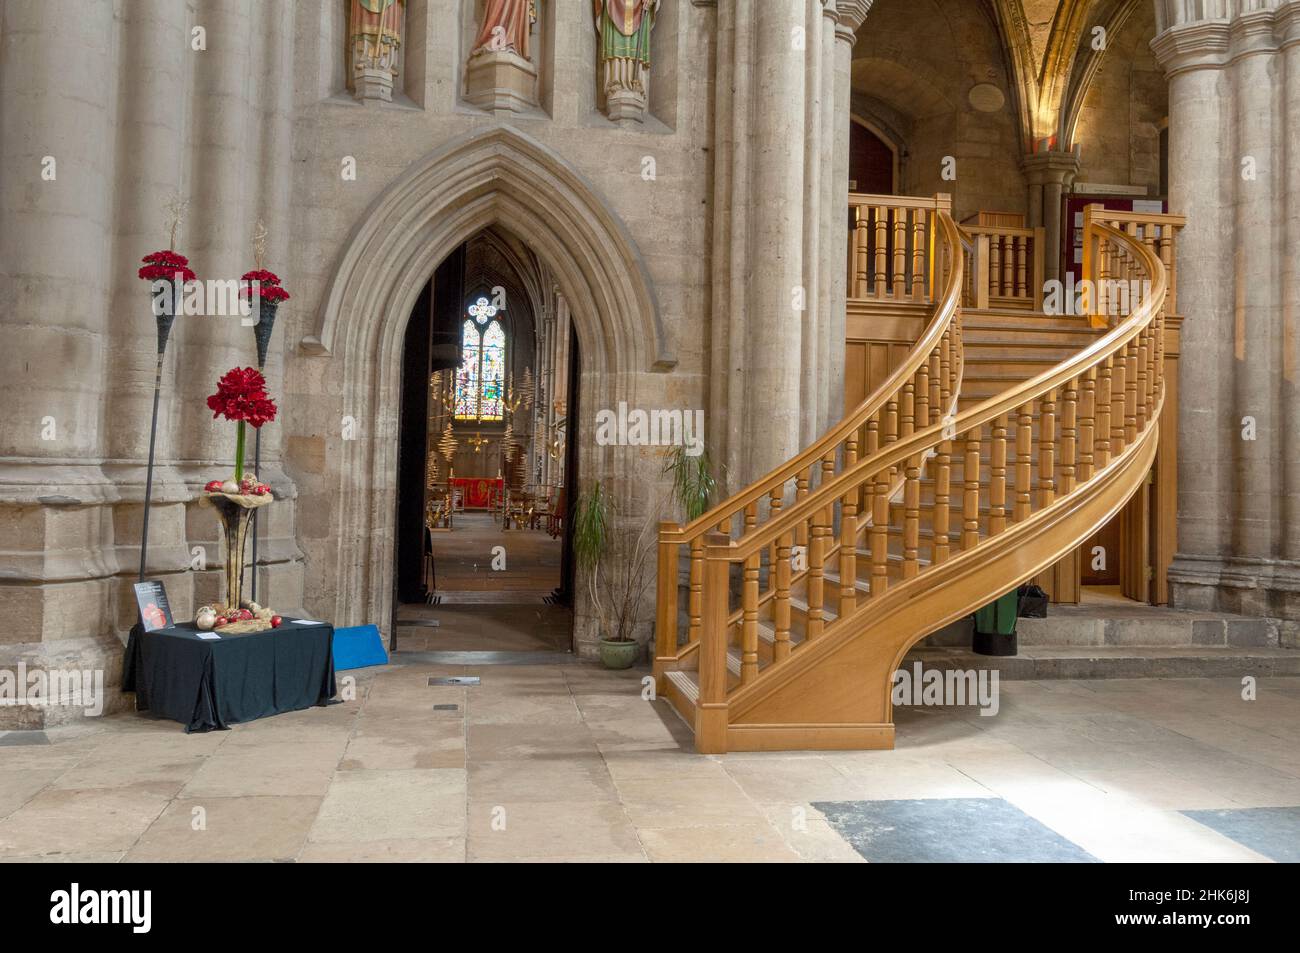 The Cathedral Church of St Peter and St Wilfrid - Ripon Cathedral - North Yorkshire, England, UK - interior view of wooden staircase Stock Photo